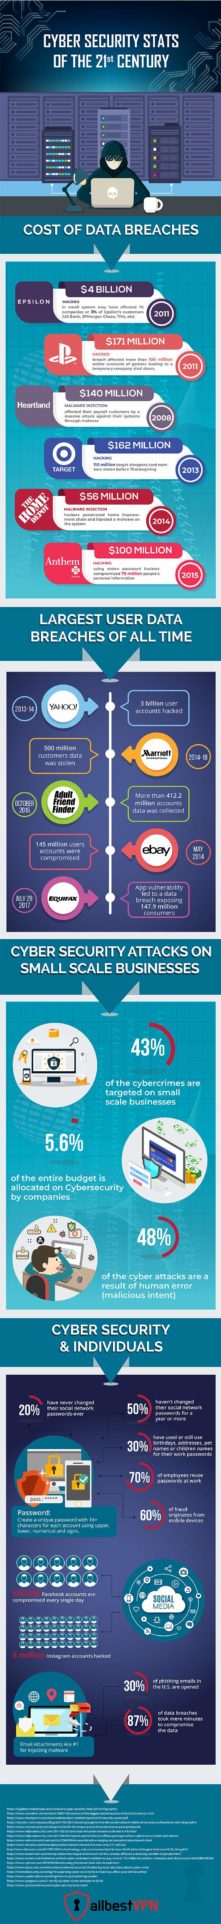 [Infographics] Cyber Security Stats of 21st Century – Cost of Data Breaches